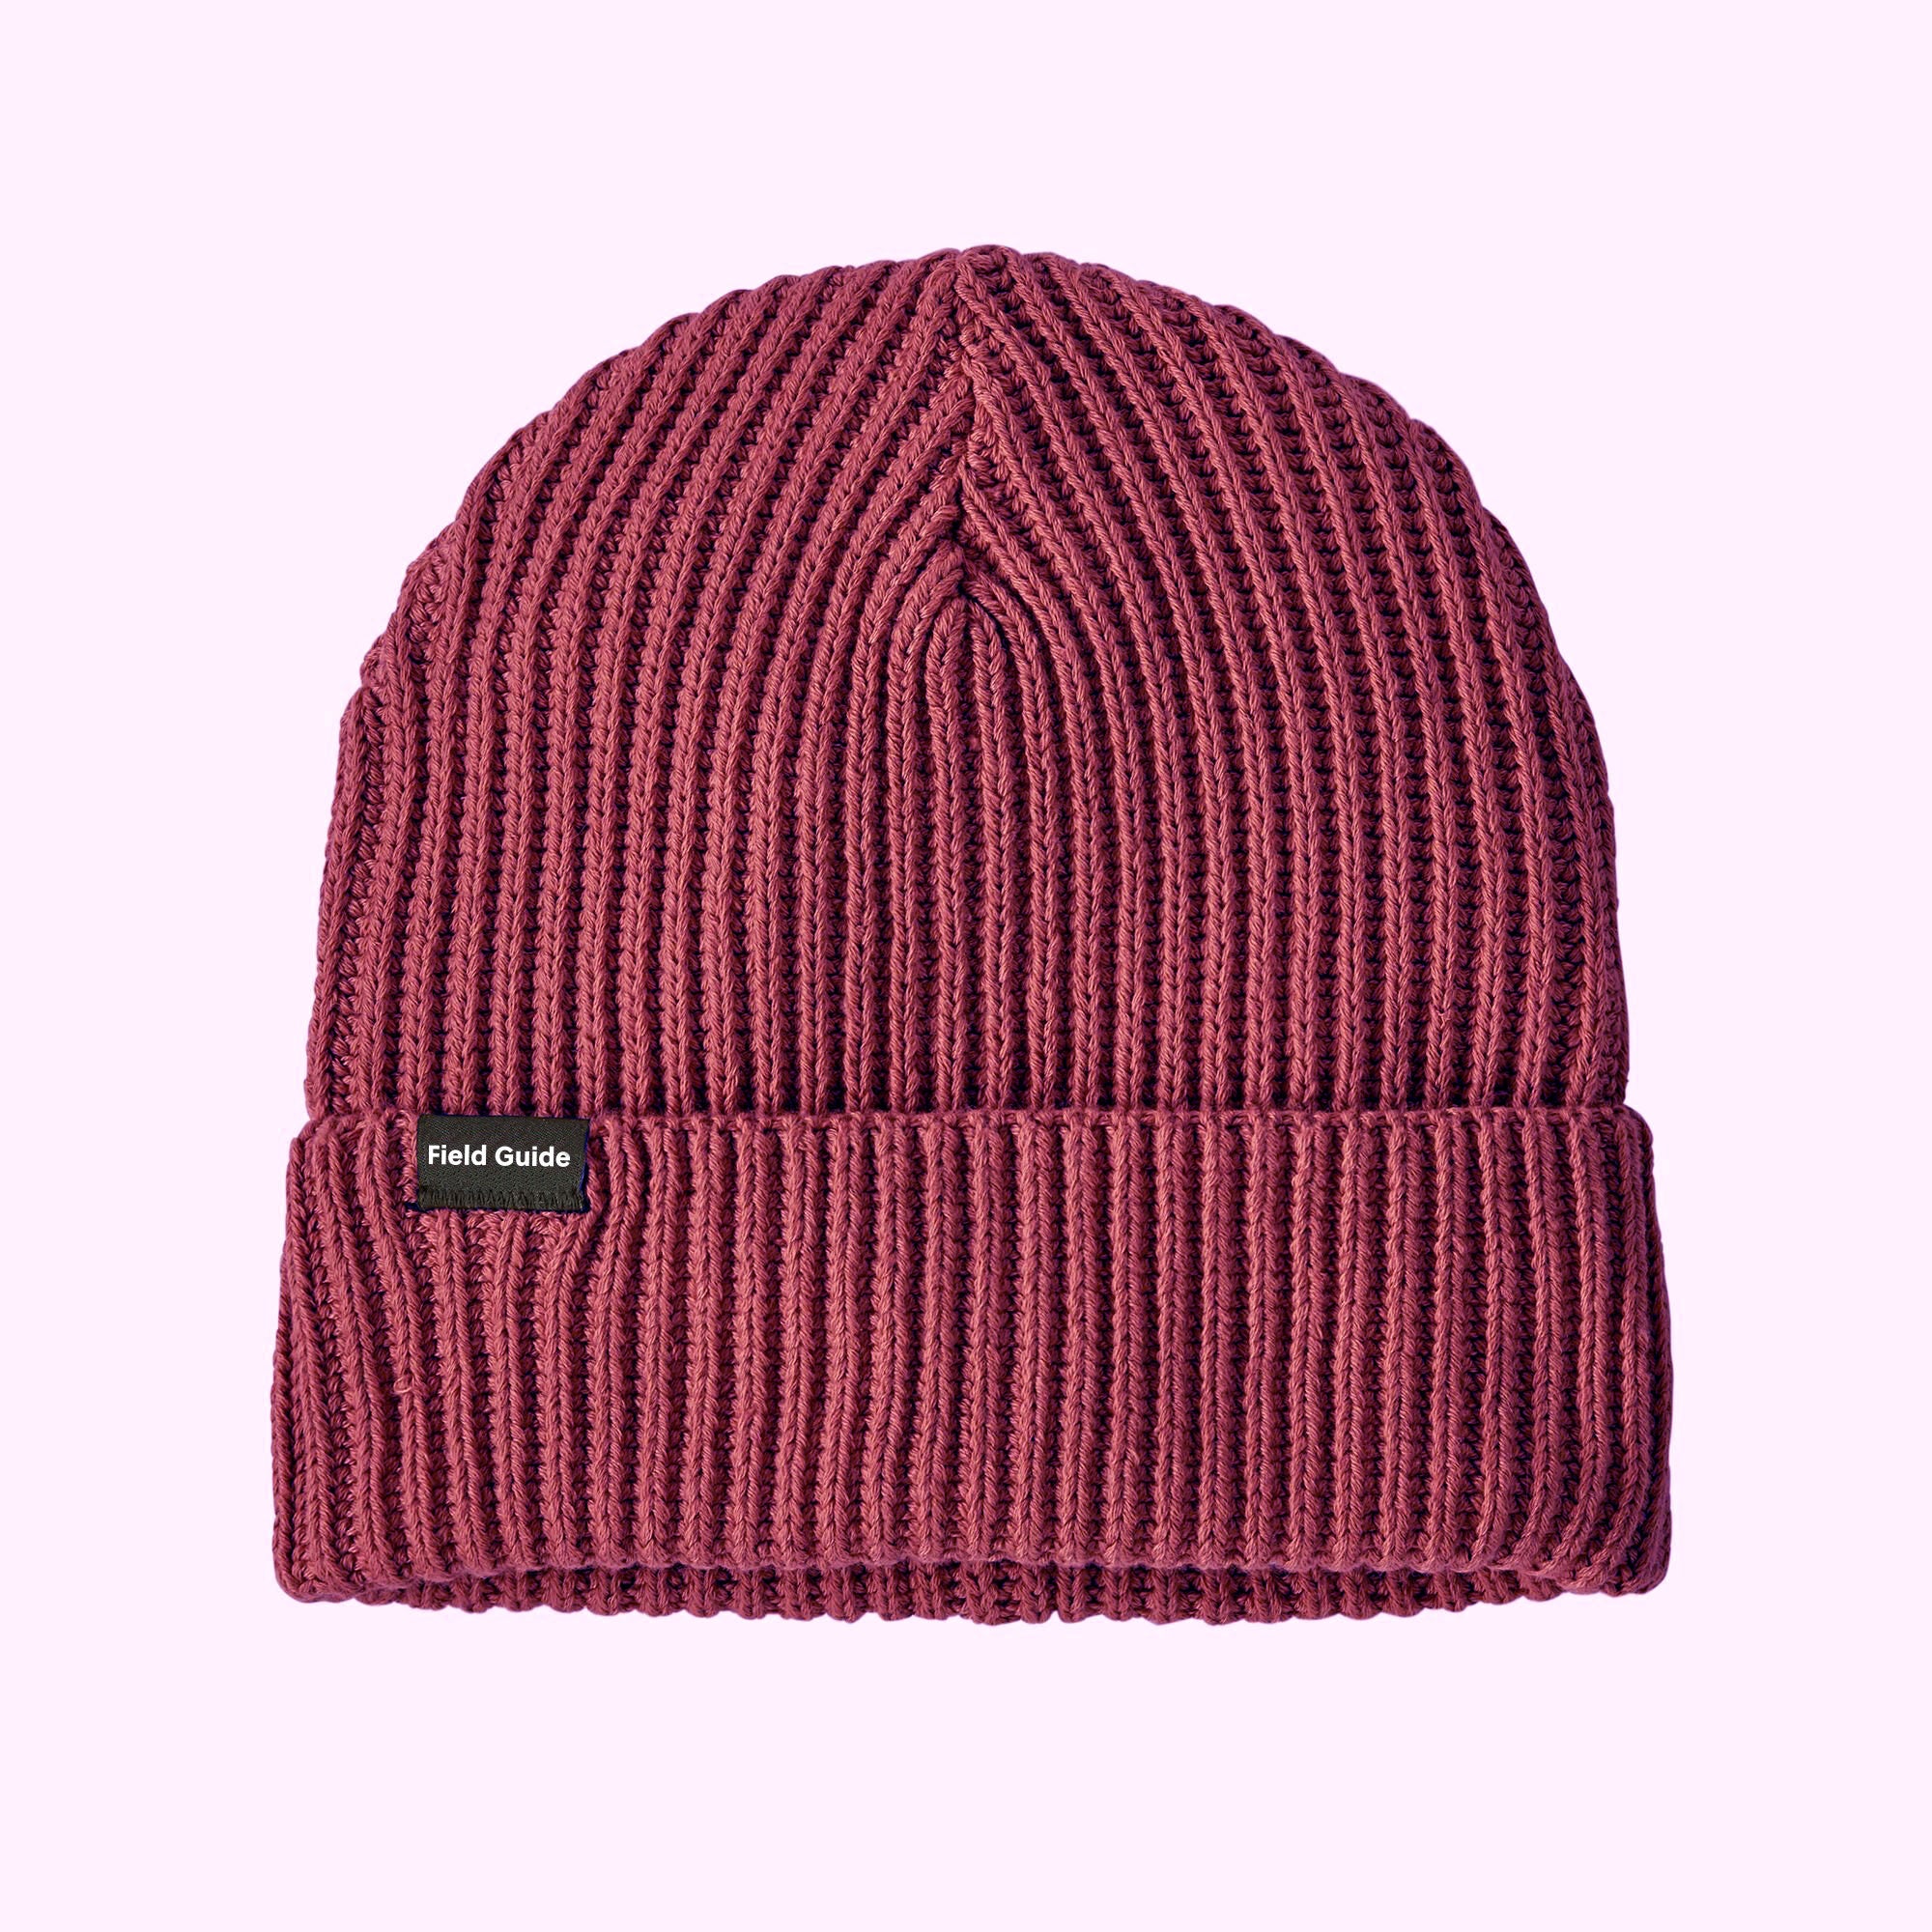 Rolled Fisherman's (Fisherperson's) Beanie